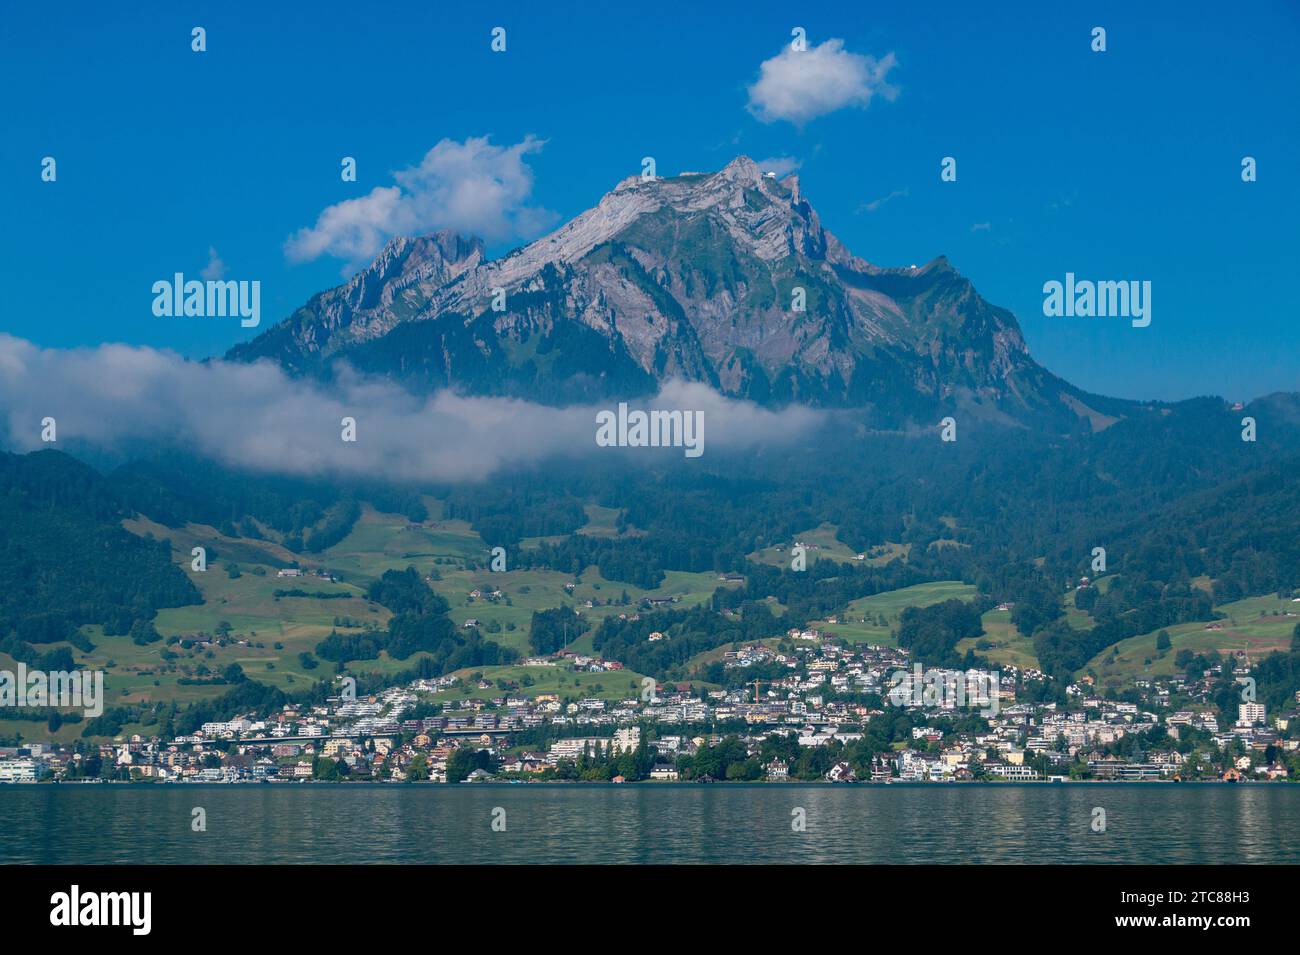 A picture of Mount Pilatus as seen from Lake Lucerne Stock Photo